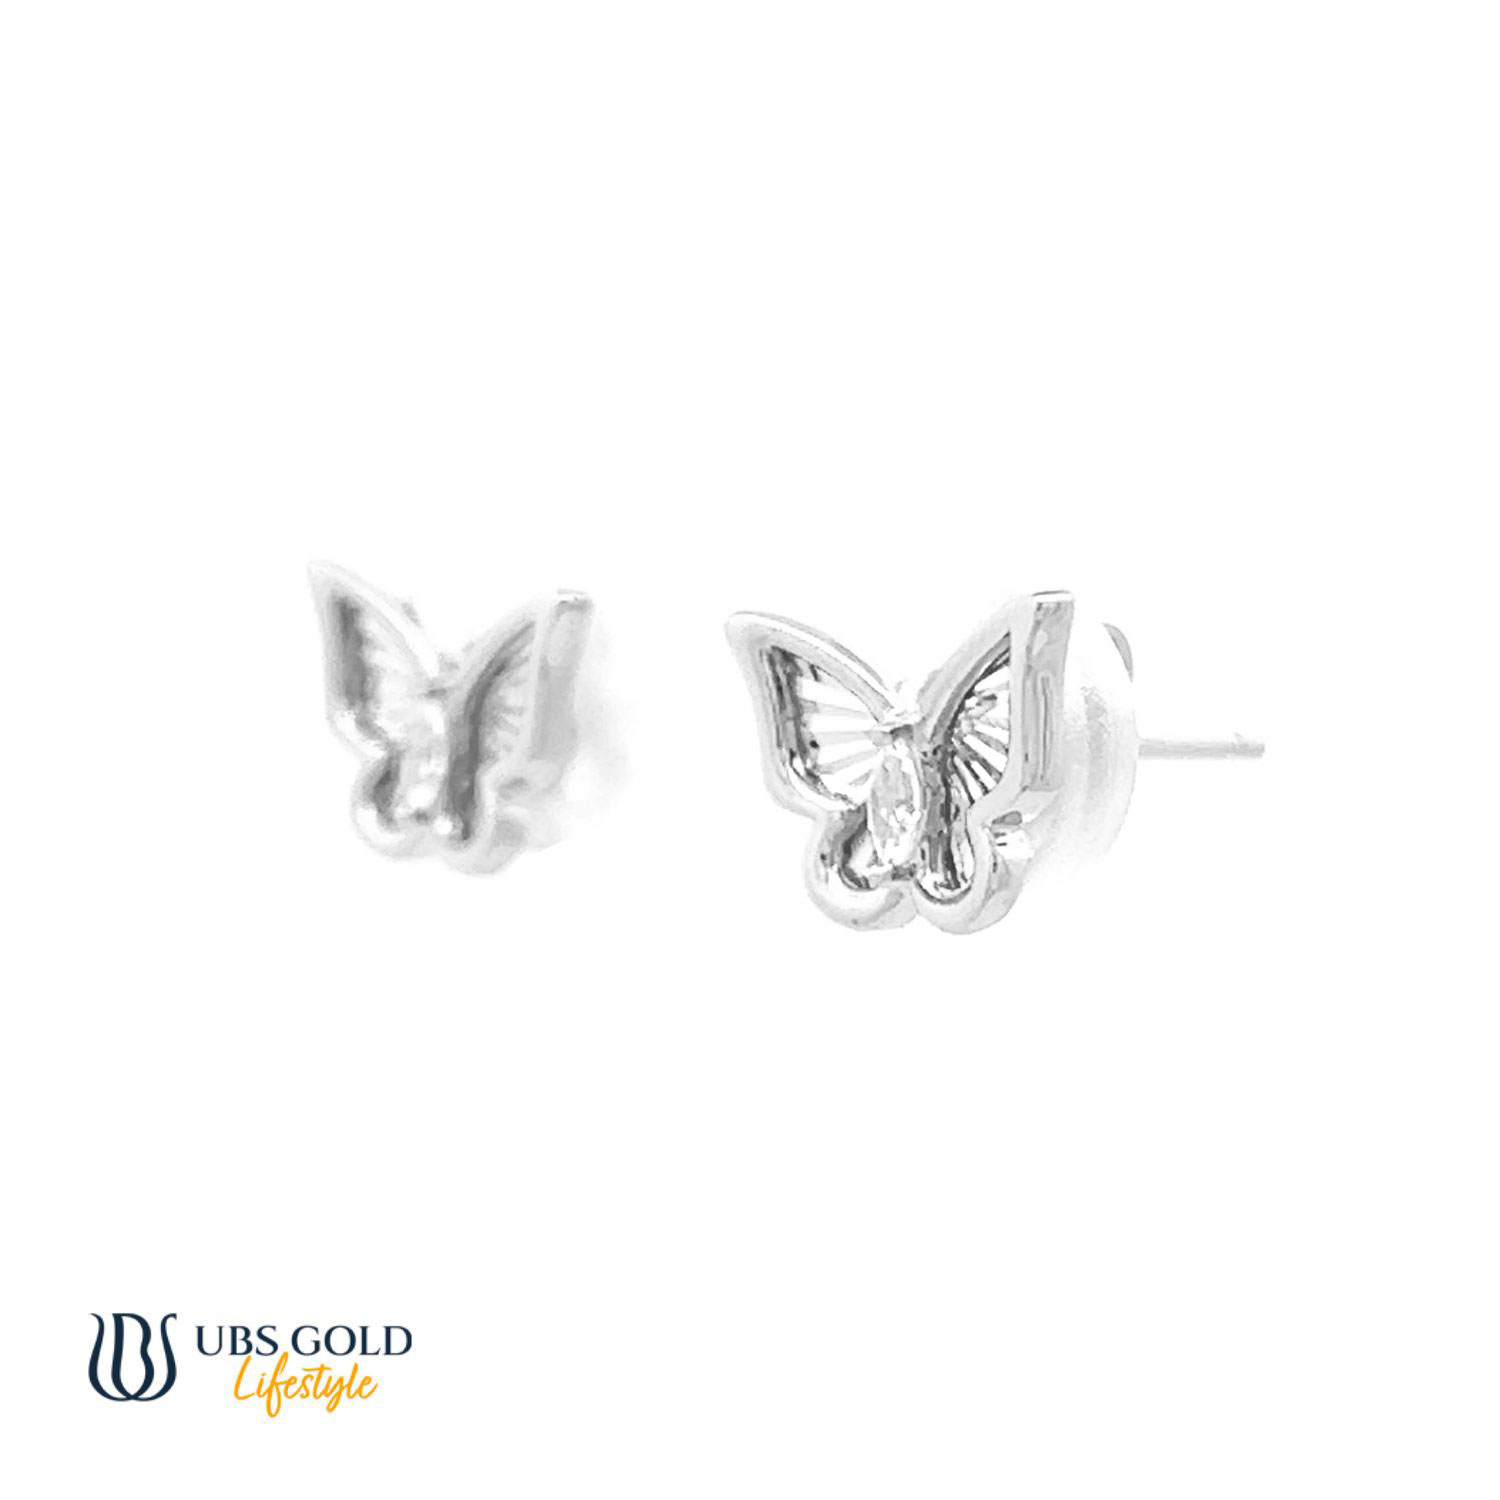 UBS Gold Anting Emas Millie Molly - Ksw1040 - 17K